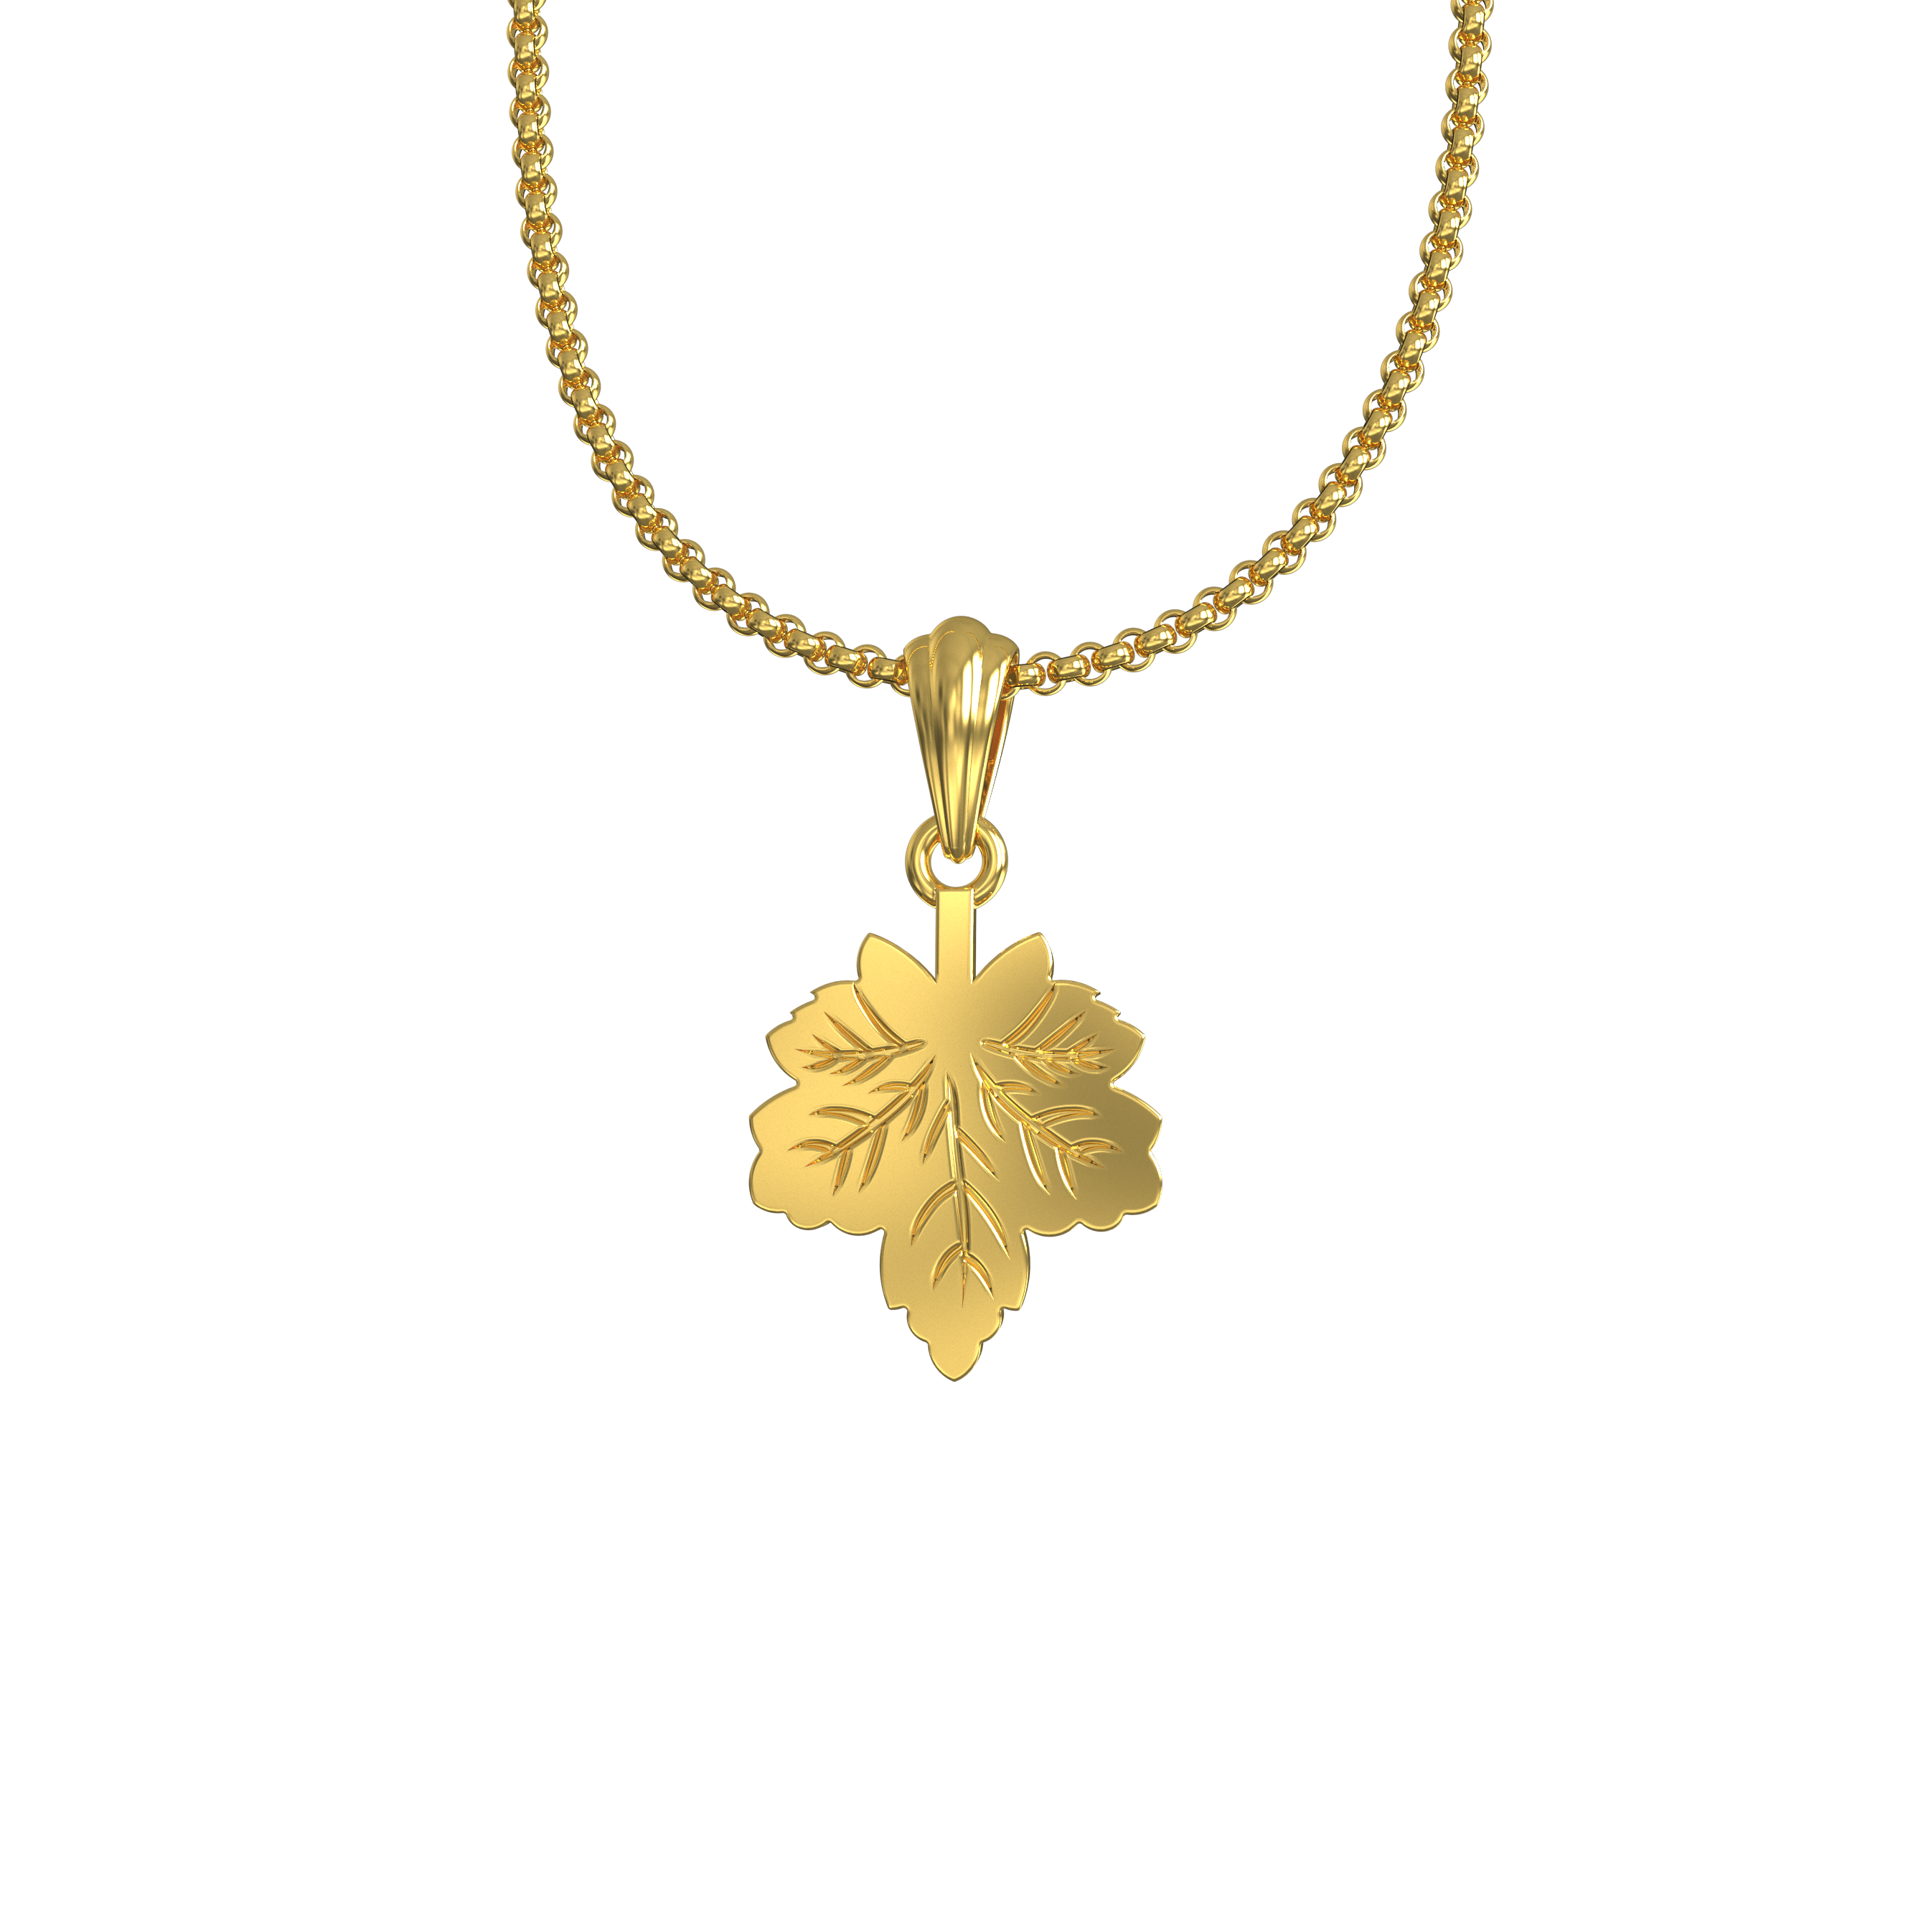 Gold Necklace PNG Images HD